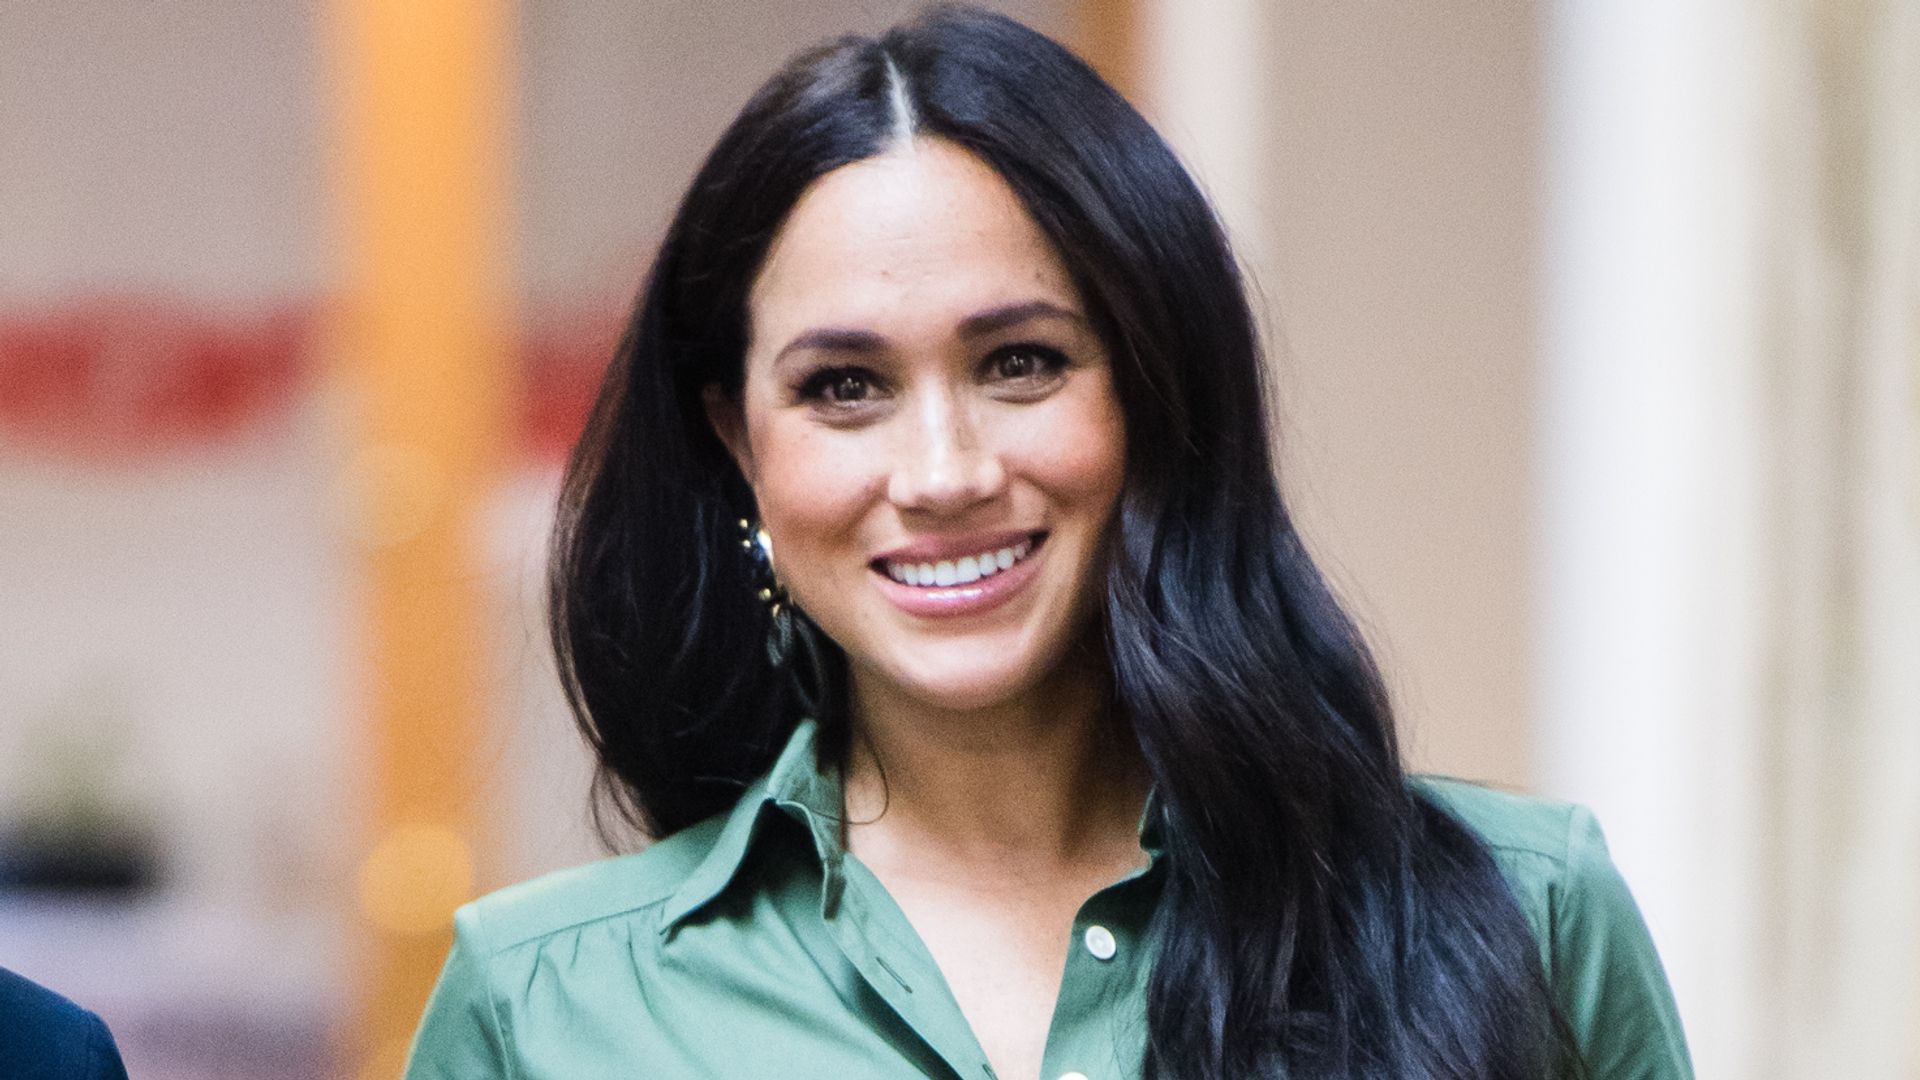 Meghan Markle welcomes spring in floral shirt dress: Heres 5 you can shop now